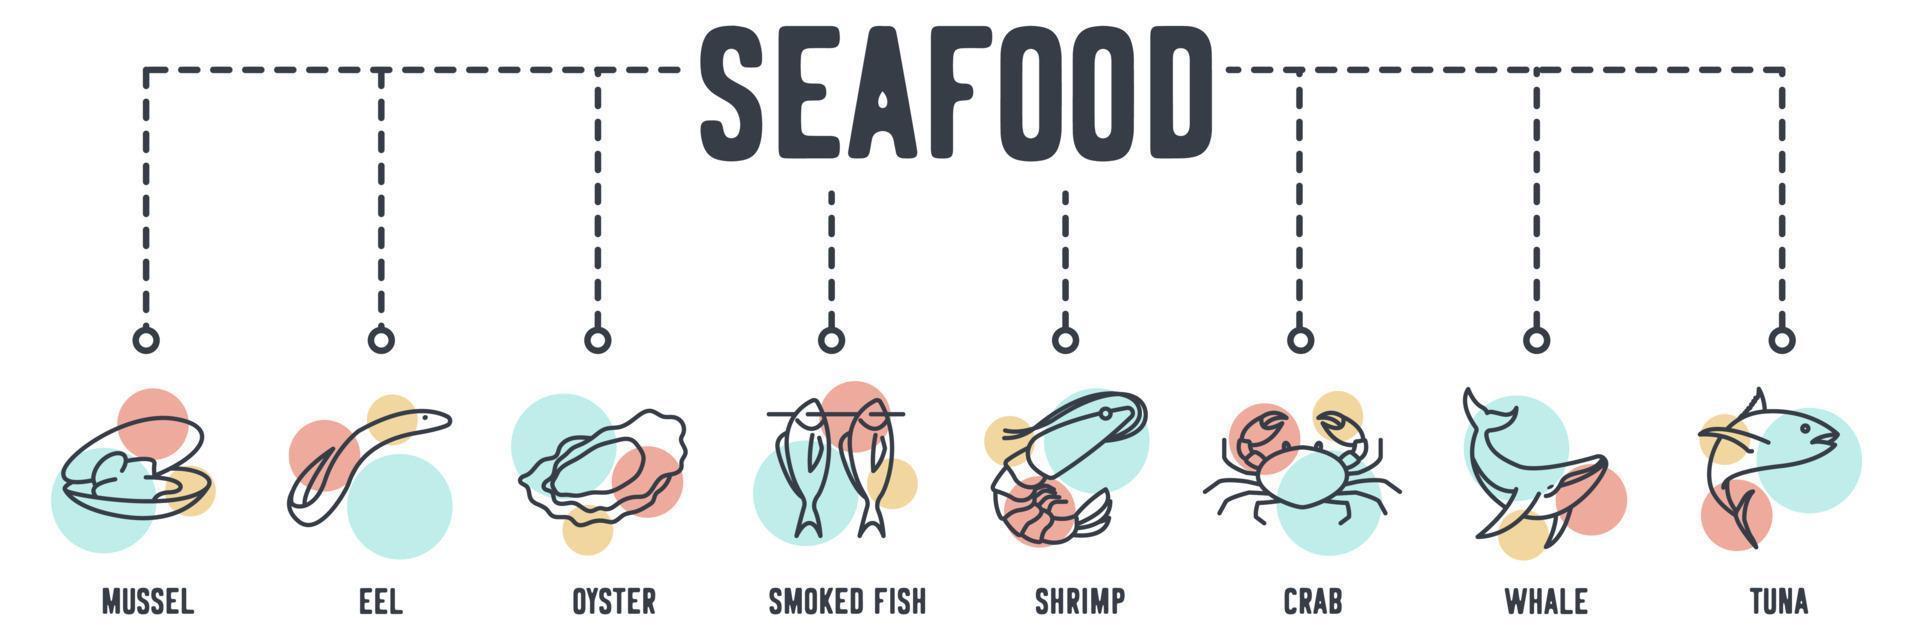 Sea Food banner web icon. mussel, eel, oyster, smoked fish, shrimp, crab, whale, tuna vector illustration concept.